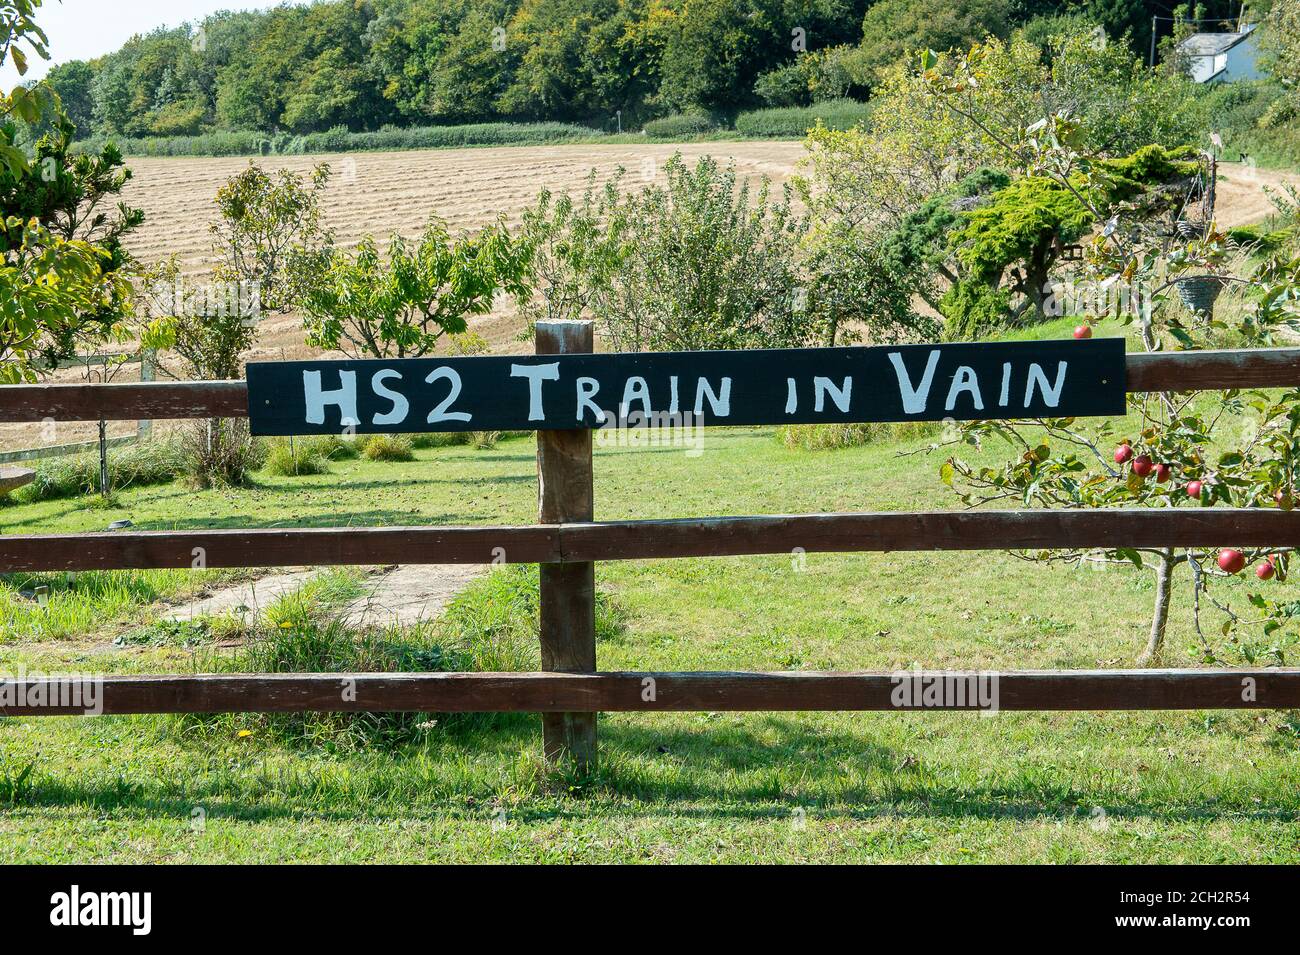 Wendover, Aylesbury Vale, Buckinghamshire. 13th September, 2020. Anti HS2 messages at homes near to the woods. Beautiful views across the Aylesbury Vale much of which is to be carved up by the controversial HS2 High Speed Rail link which will destroy ancient woodlands and wildlife habitats. Credit: Maureen McLean/Alamy Live News Stock Photo